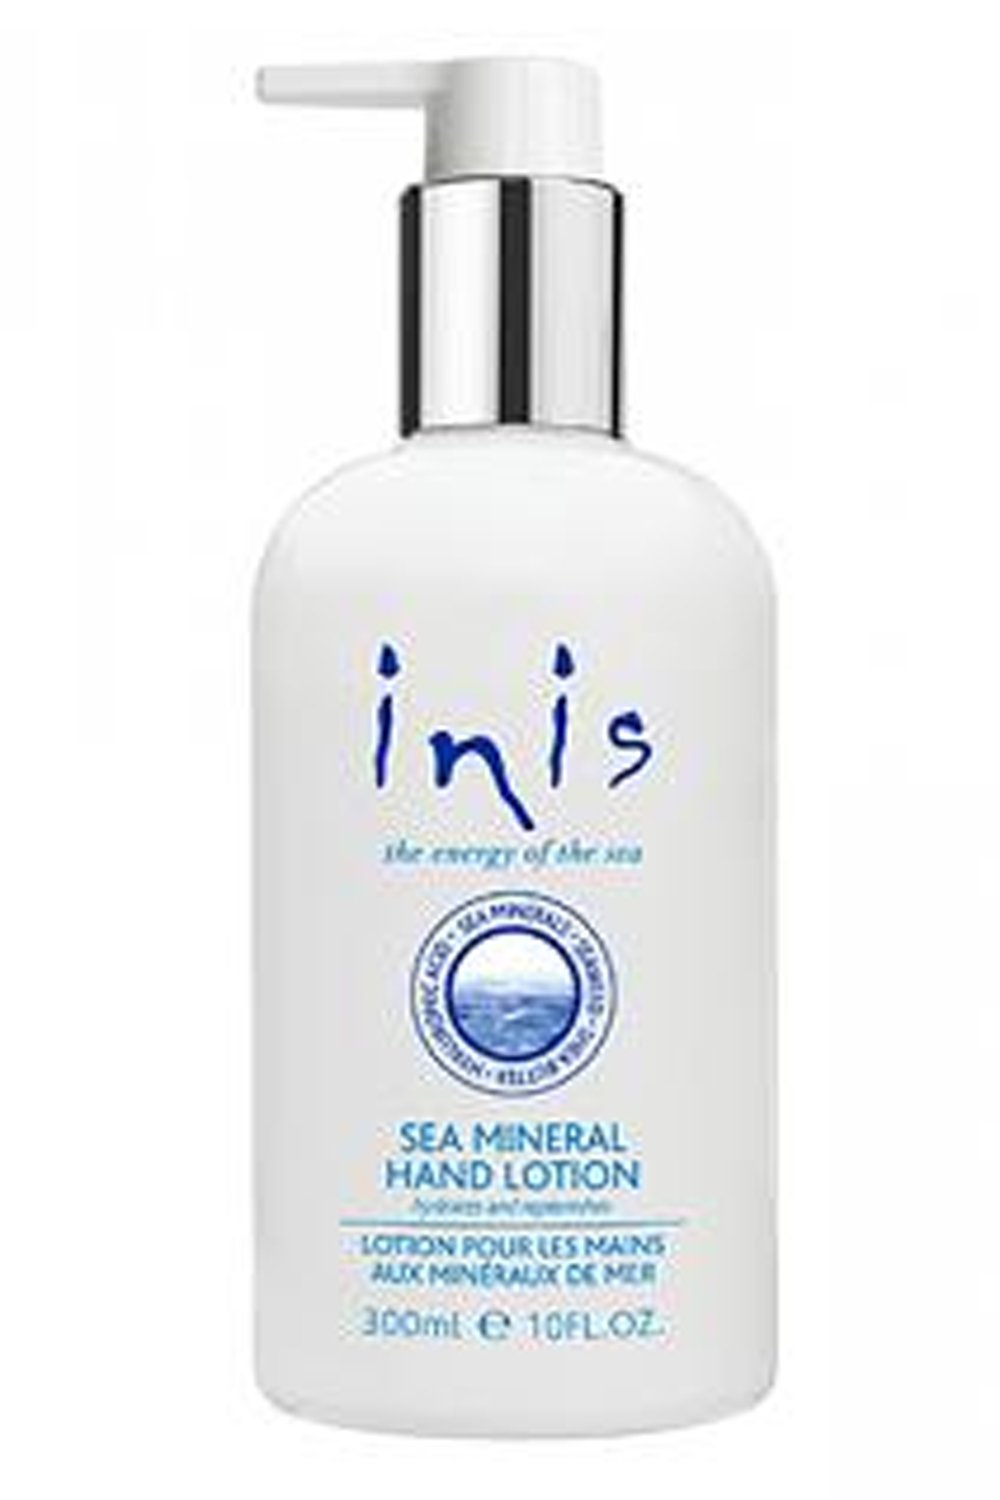 Inis the Energy of the Sea - Sea Mineral Hand Lotion 300ml/10 fl. oz.